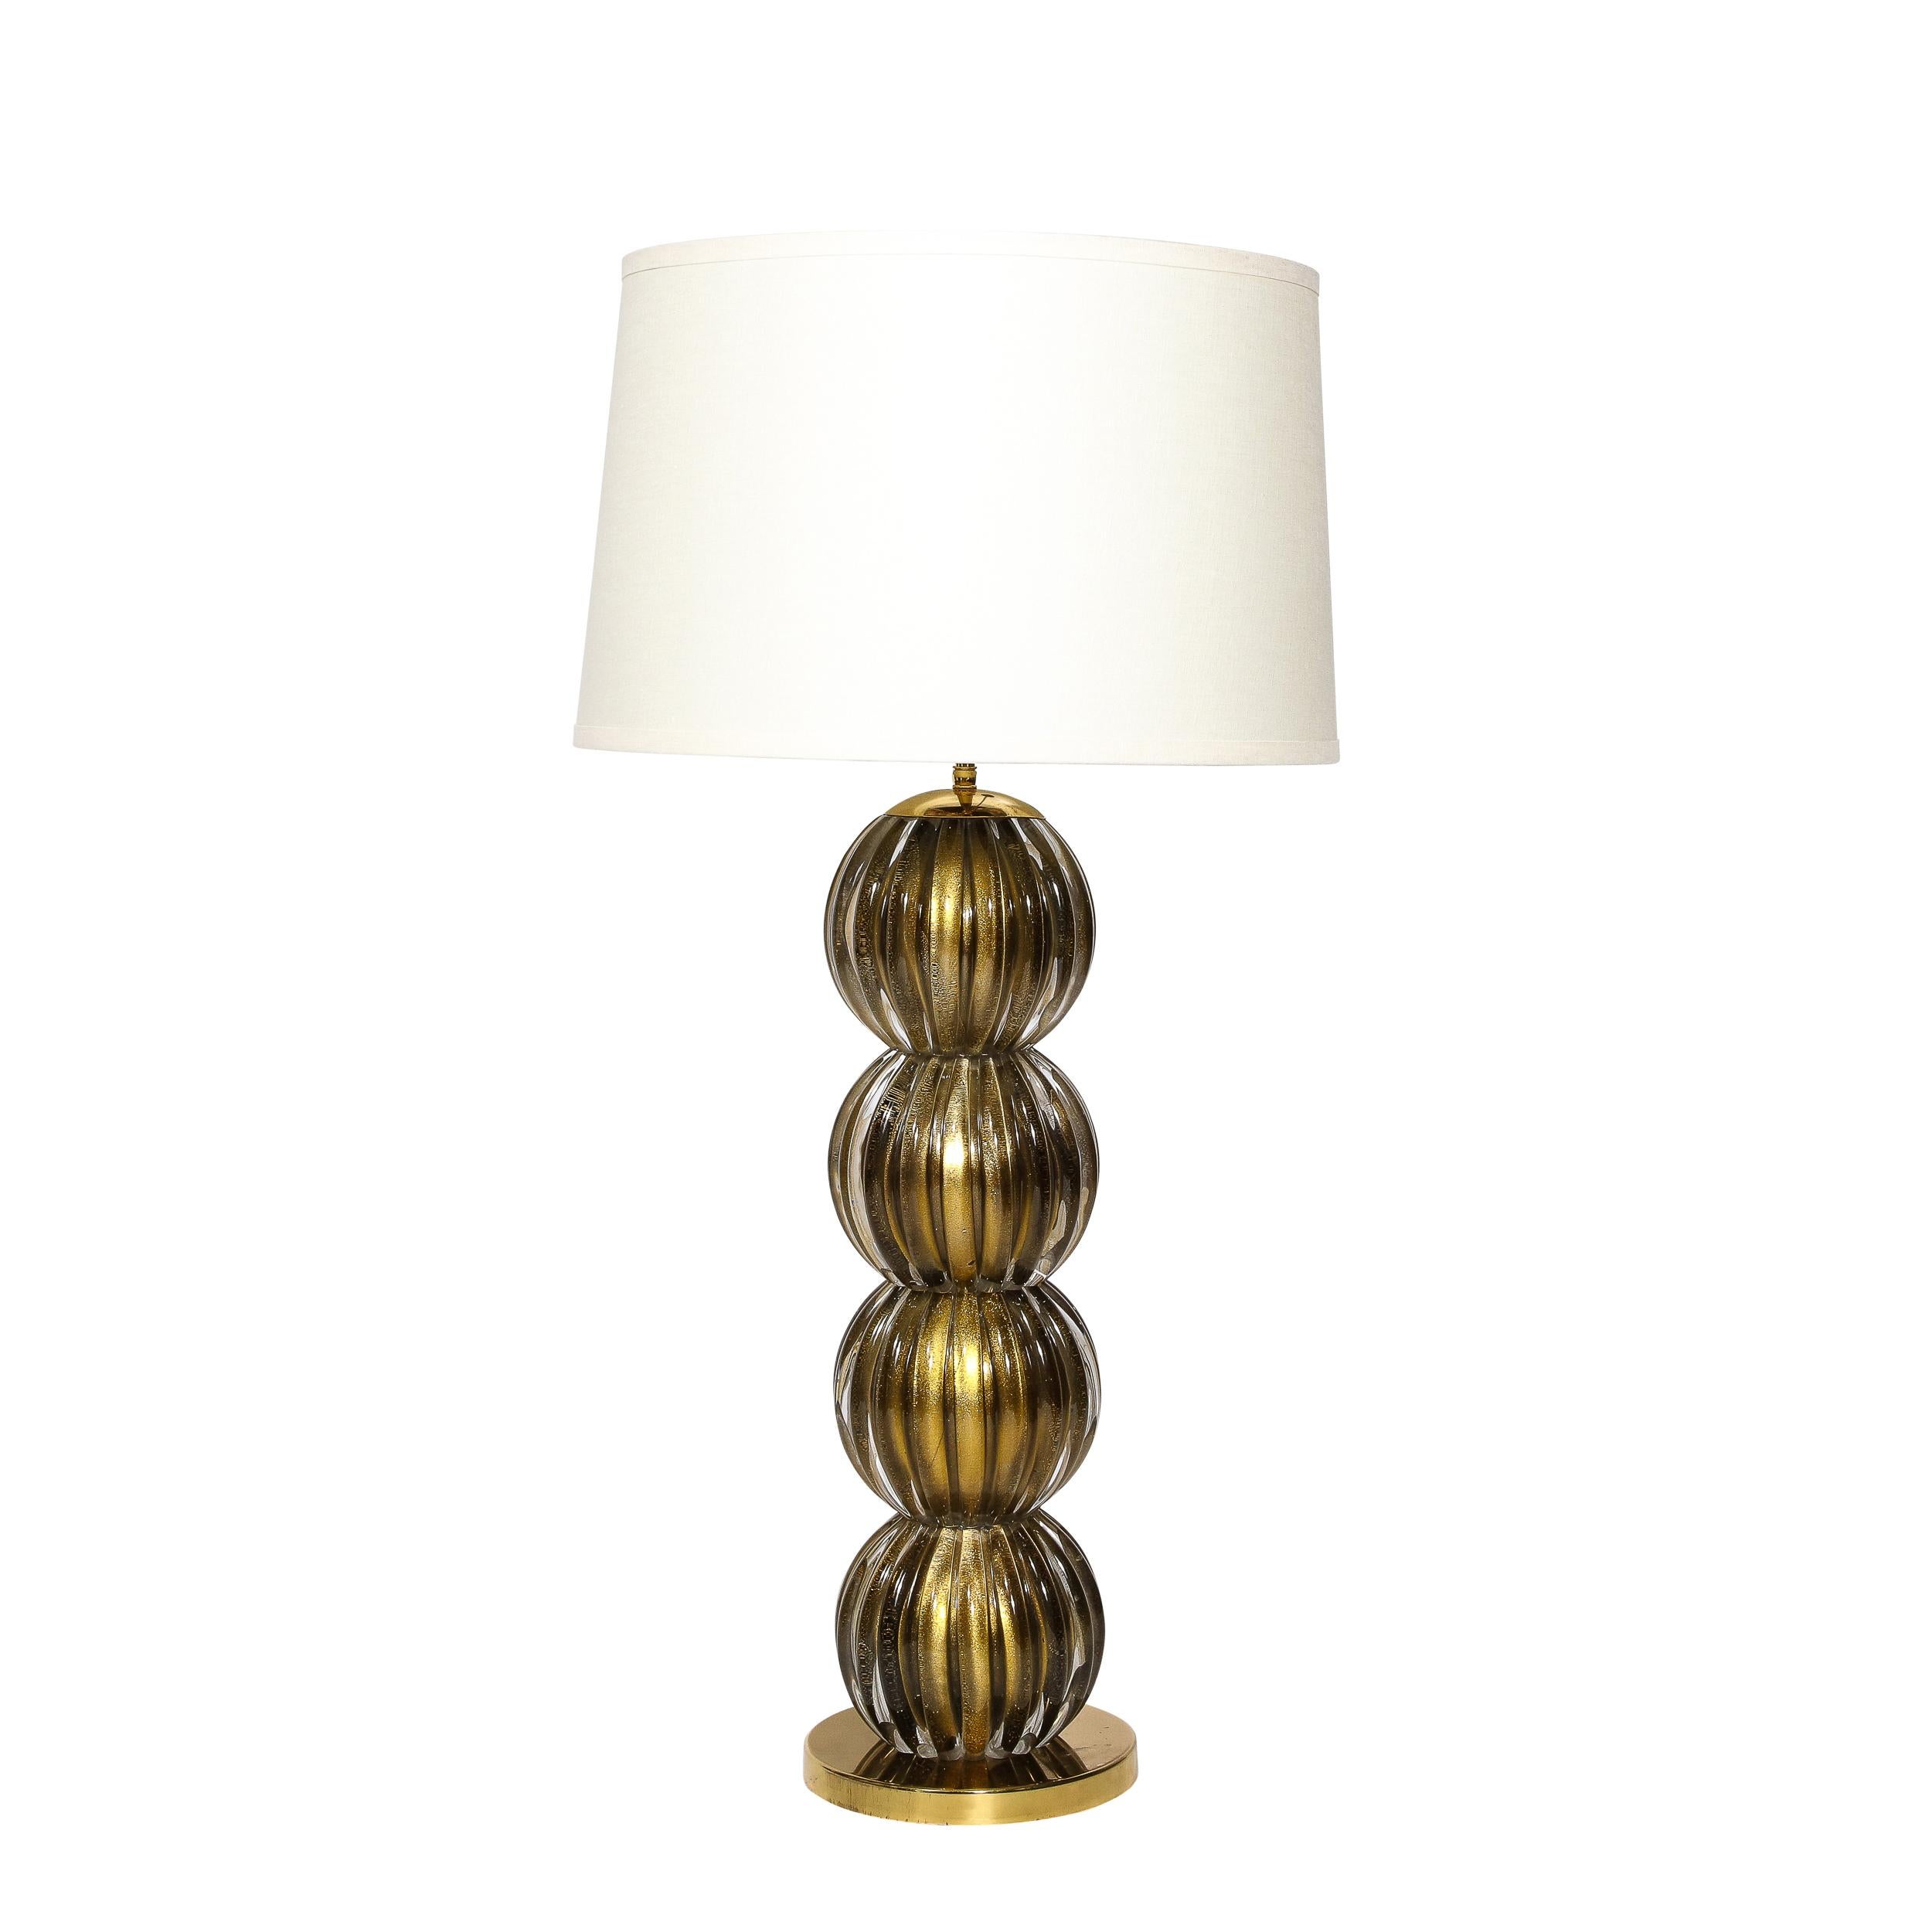 This impressive pair of large scale table lamps were realized in Murano, Italy- the island off the coast of Venice renowned for centuries for its superlative glass production- during the latter half of the 20th century. They feature circular brass